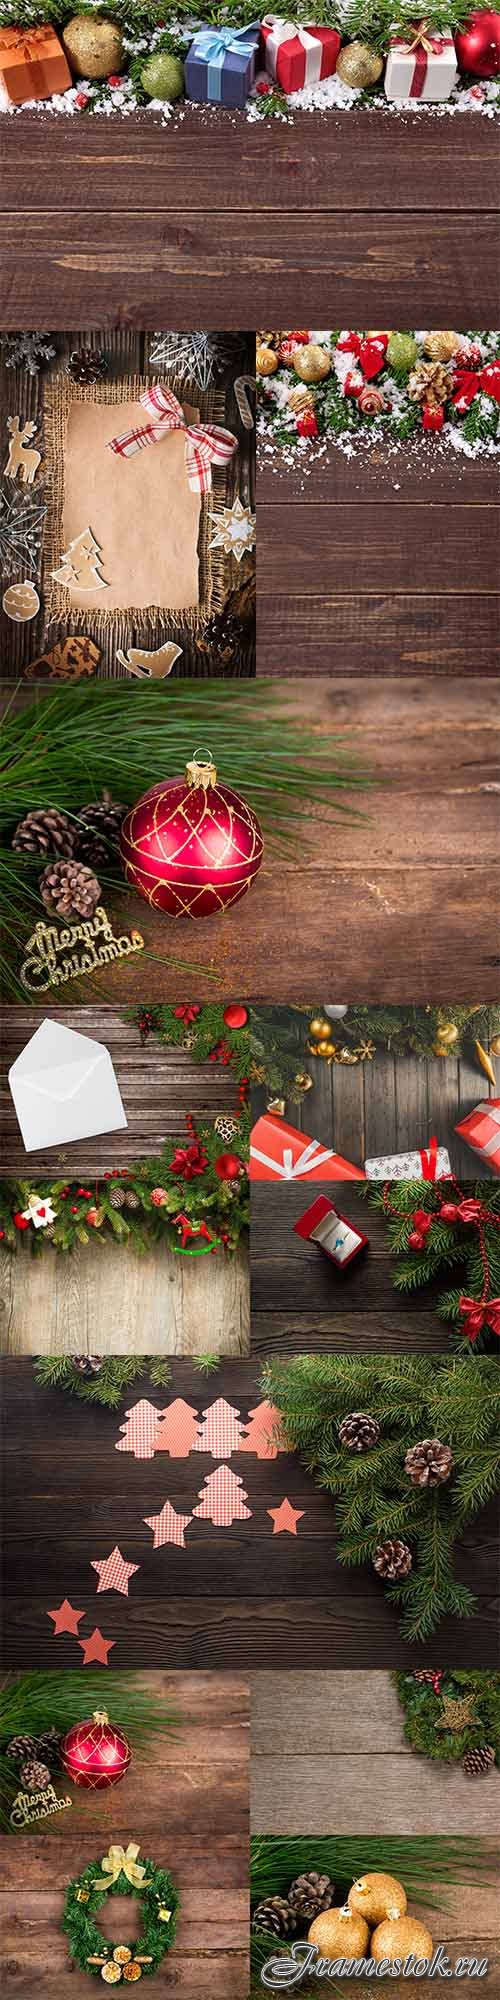 Wooden backgrounds with Christmas decorations